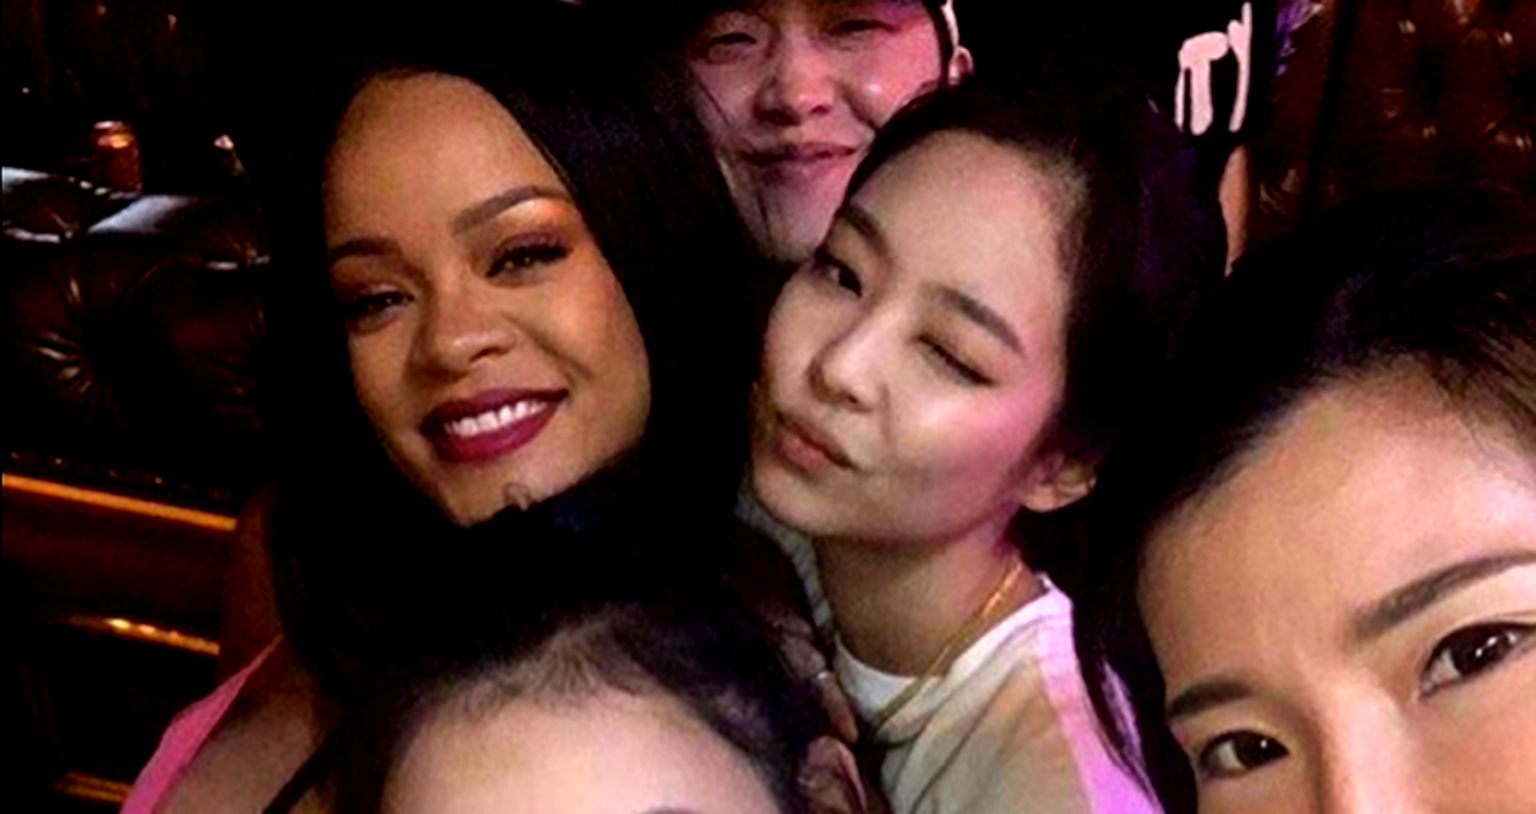 Rihanna Met BLACKPINK’s Jennie and Fans are Going Bonkers